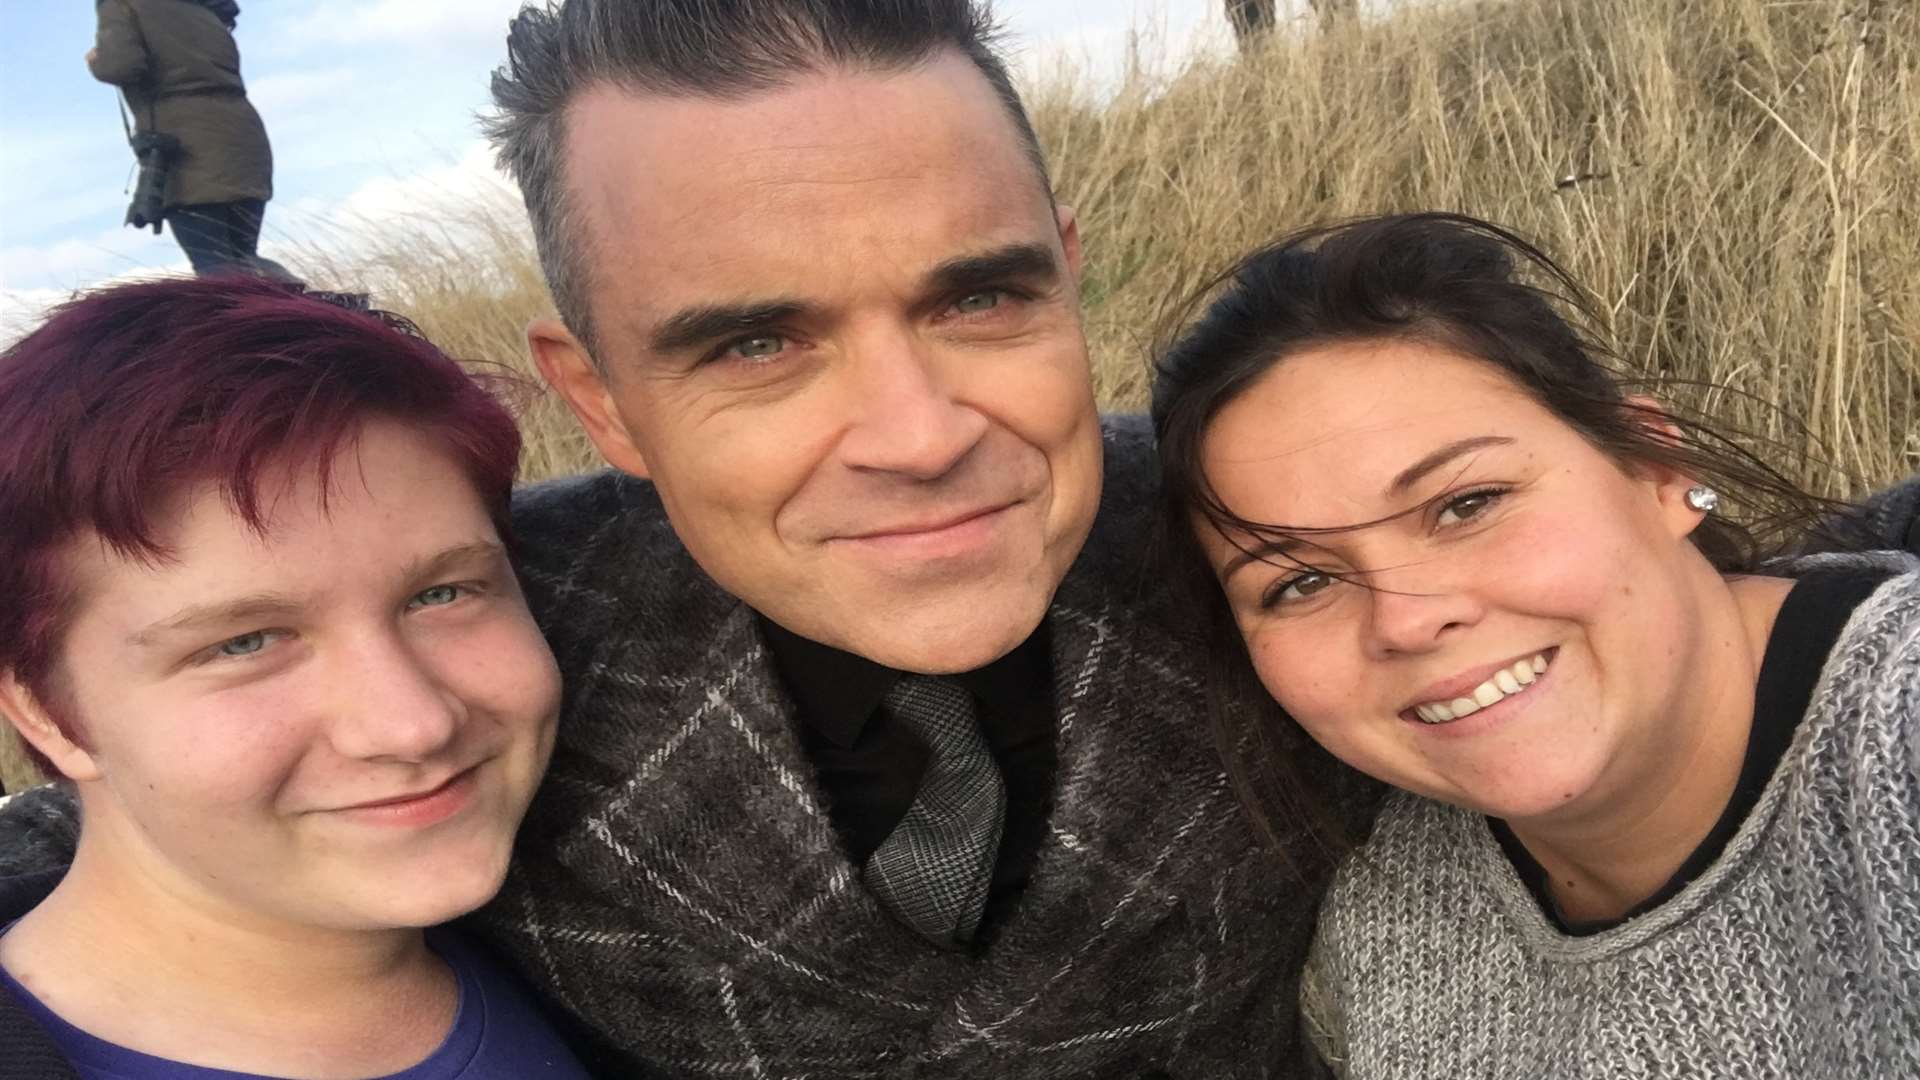 Robbie Williams poses for a selfie with Dan Hughes and Sasha Burgoine at Leysdown, Sheppey, after Sasha crashed her car while trying to see him filming his Christmas video